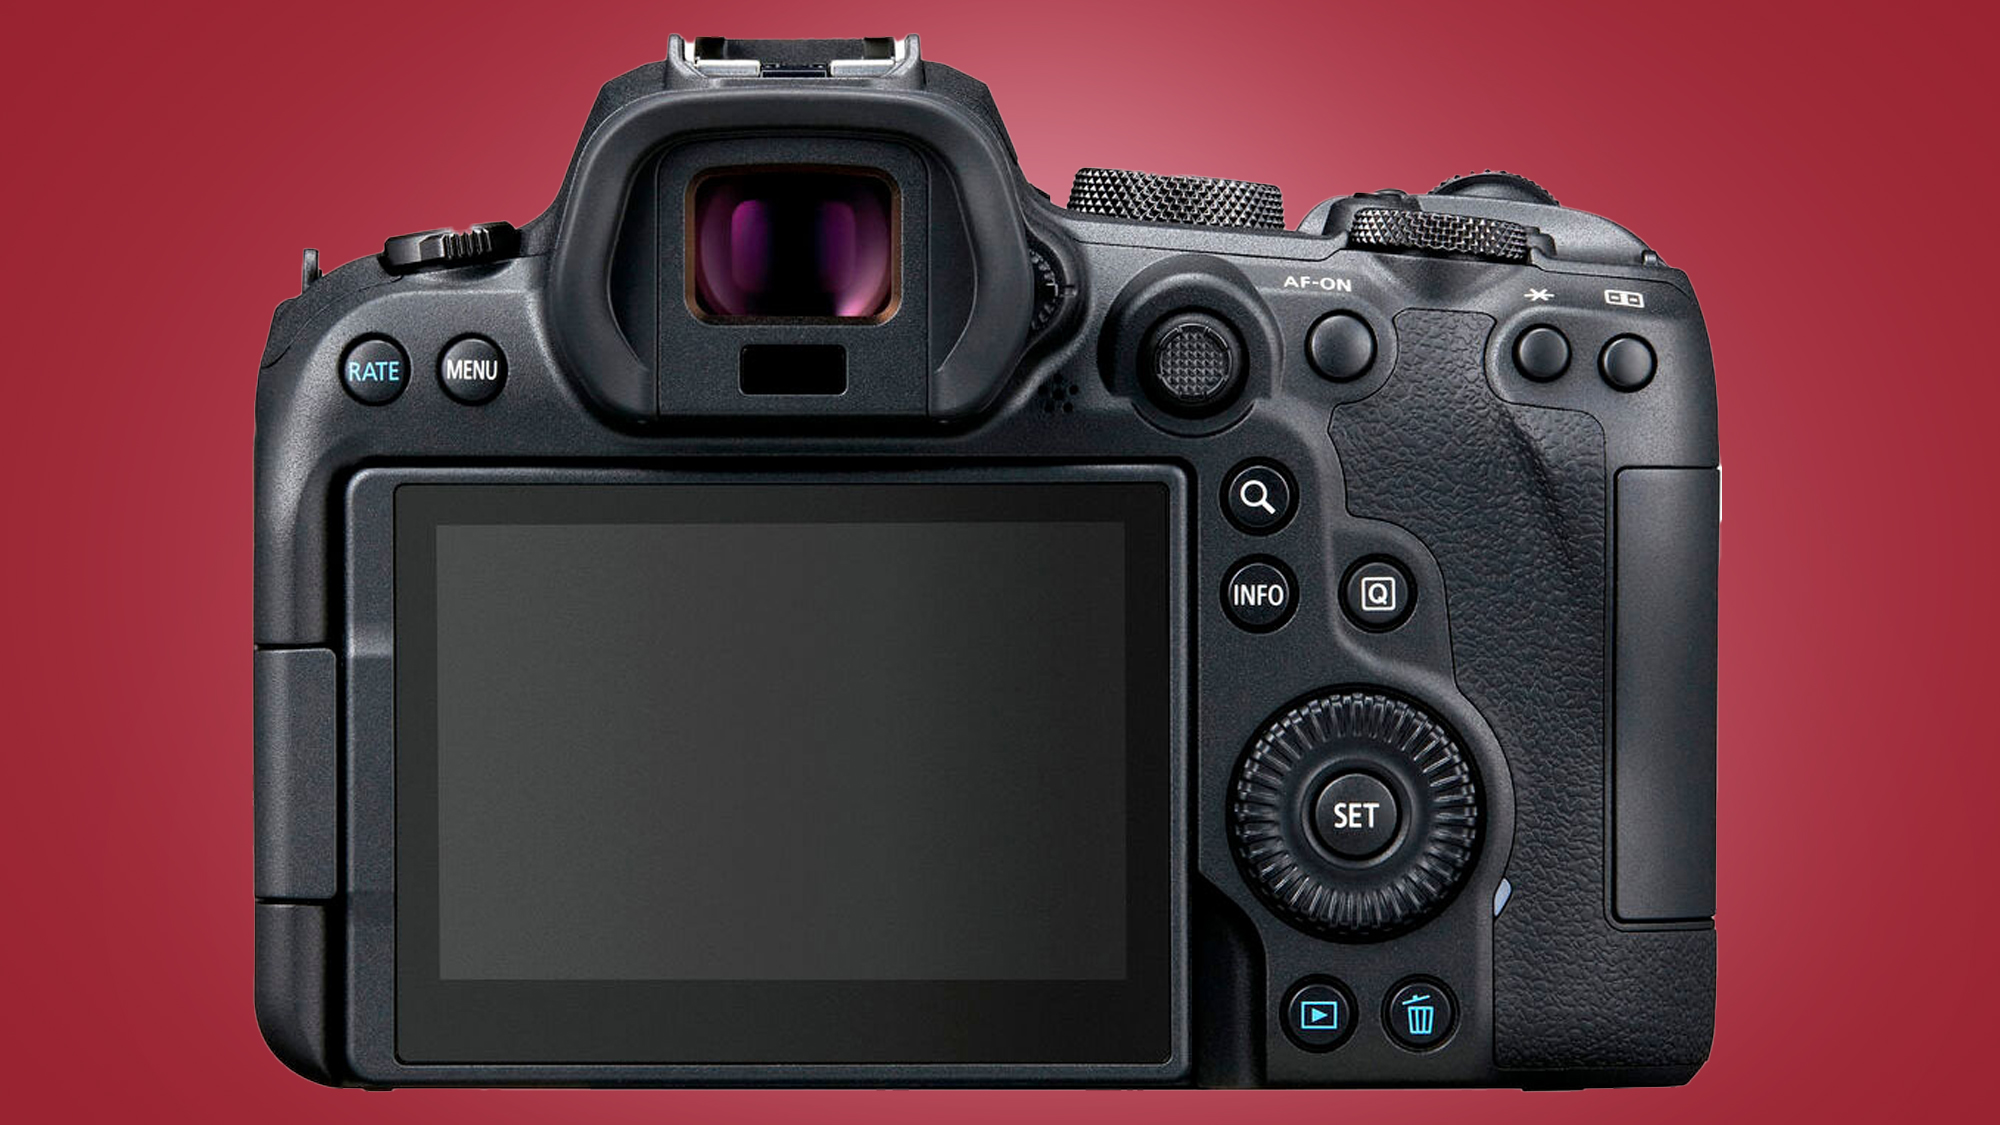 The back of the Canon EOS R6 mirrorless camera